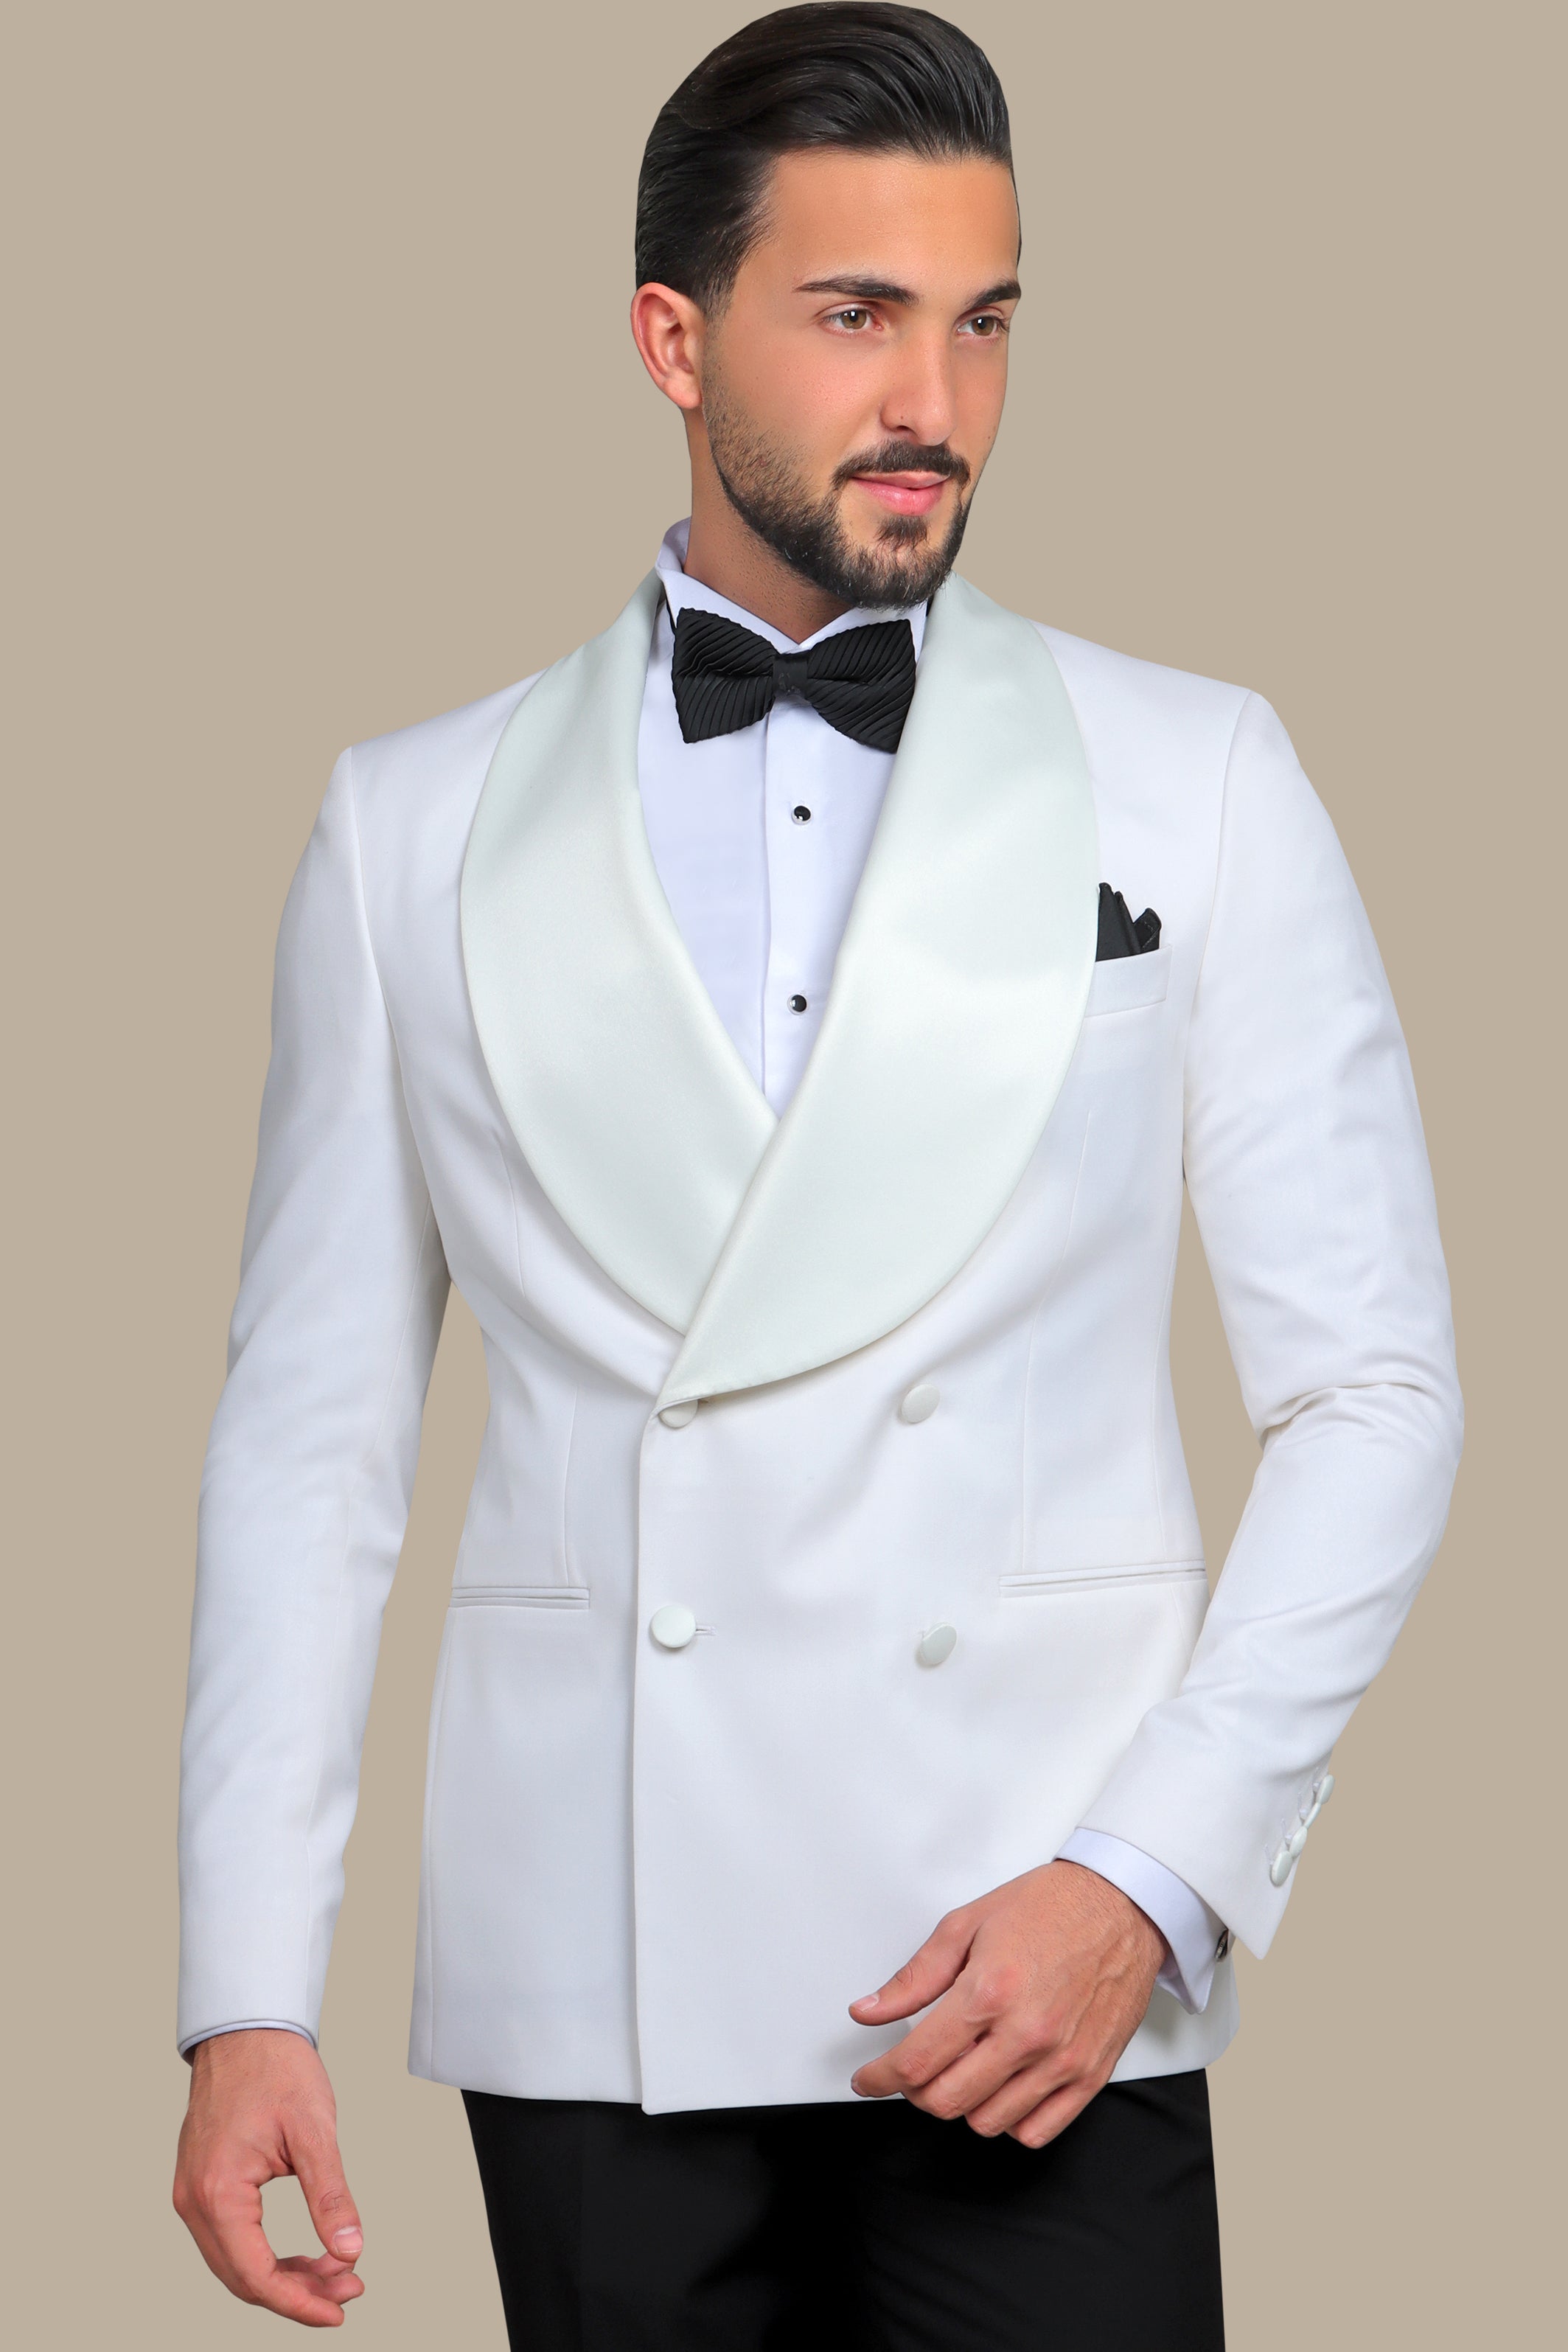 Timeless Sophistication: Off-White Tuxedo with Wide Shawl Collar